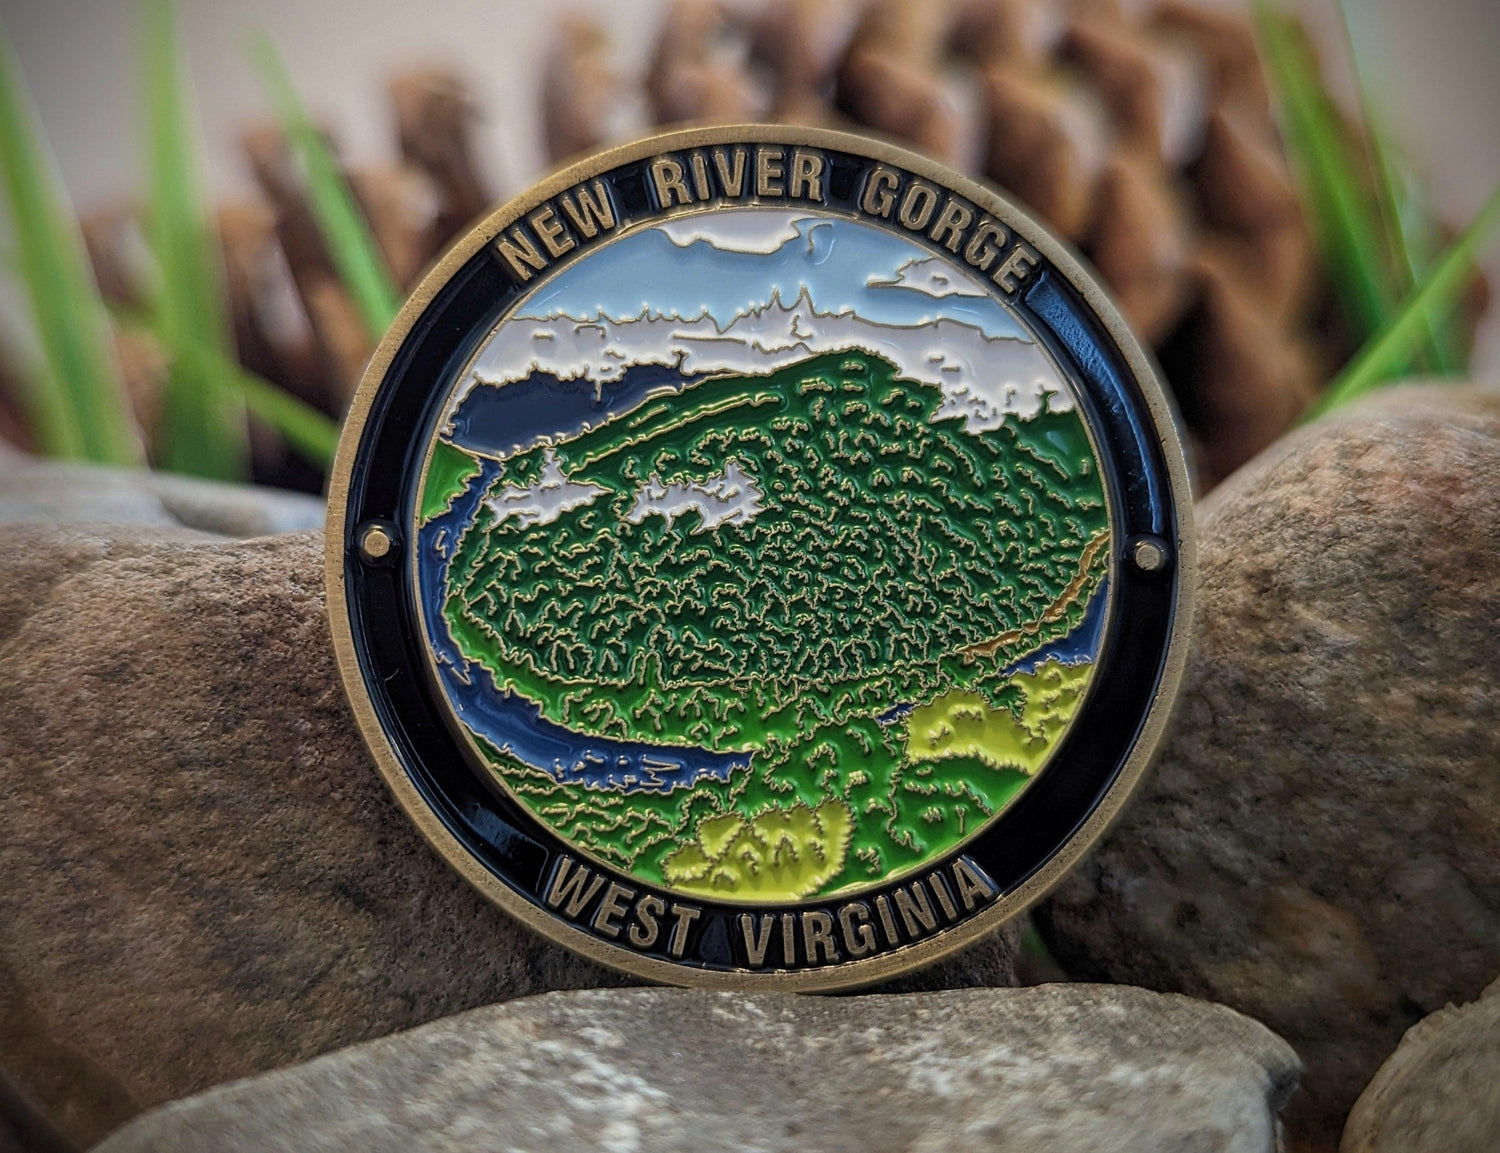 NEW RIVER GORGE NATIONAL PARK CHALLENGE COIN